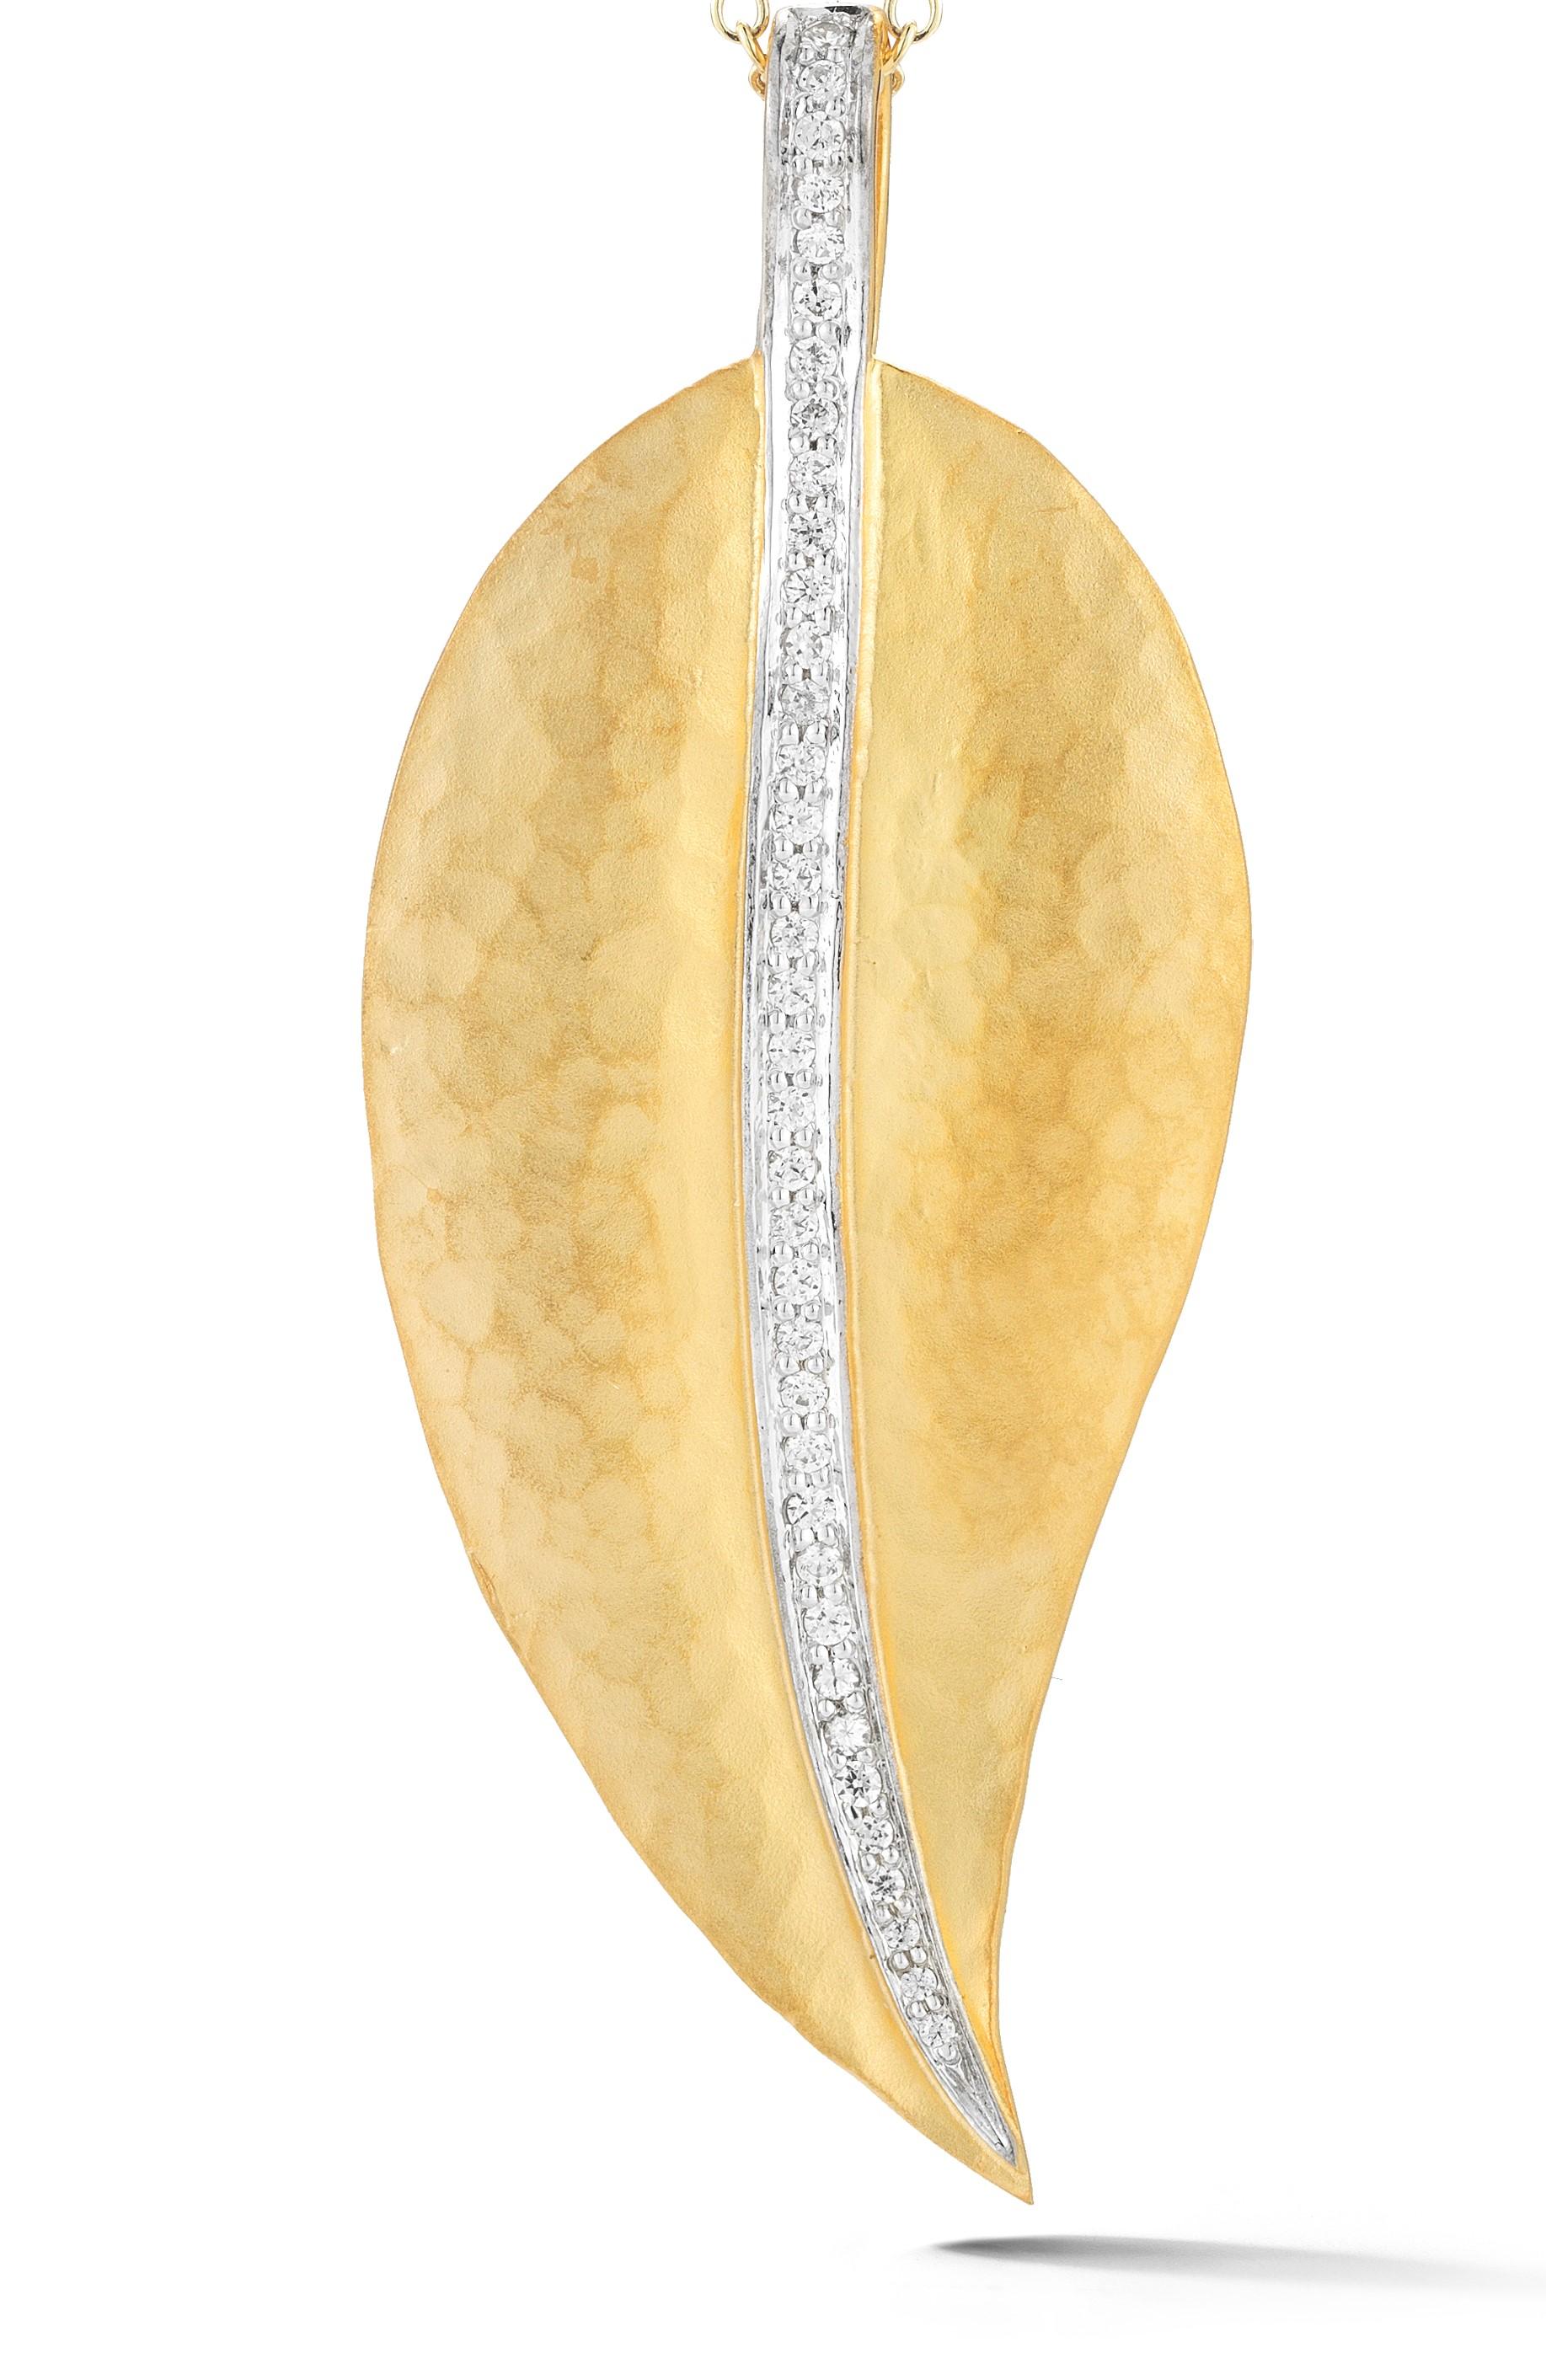 14 Karat Yellow Gold Hand-Crafted Matte and Hammer-Finished Leaf Pendant, Enhanced with 0.27 Carats of Pave Set Diamonds, Sliding on a 16